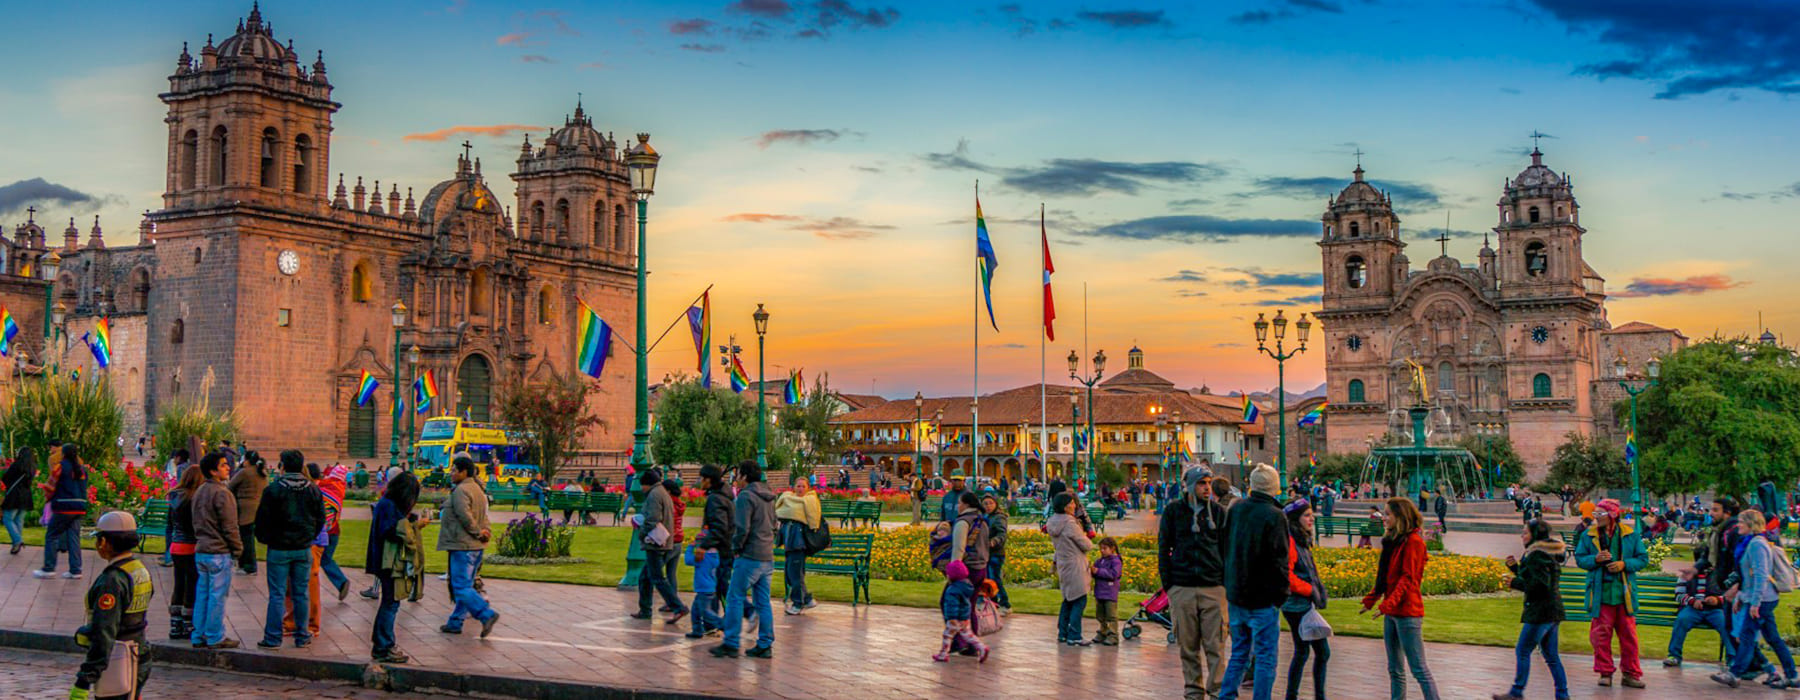 HOW TO SAVE IN CUSCO?